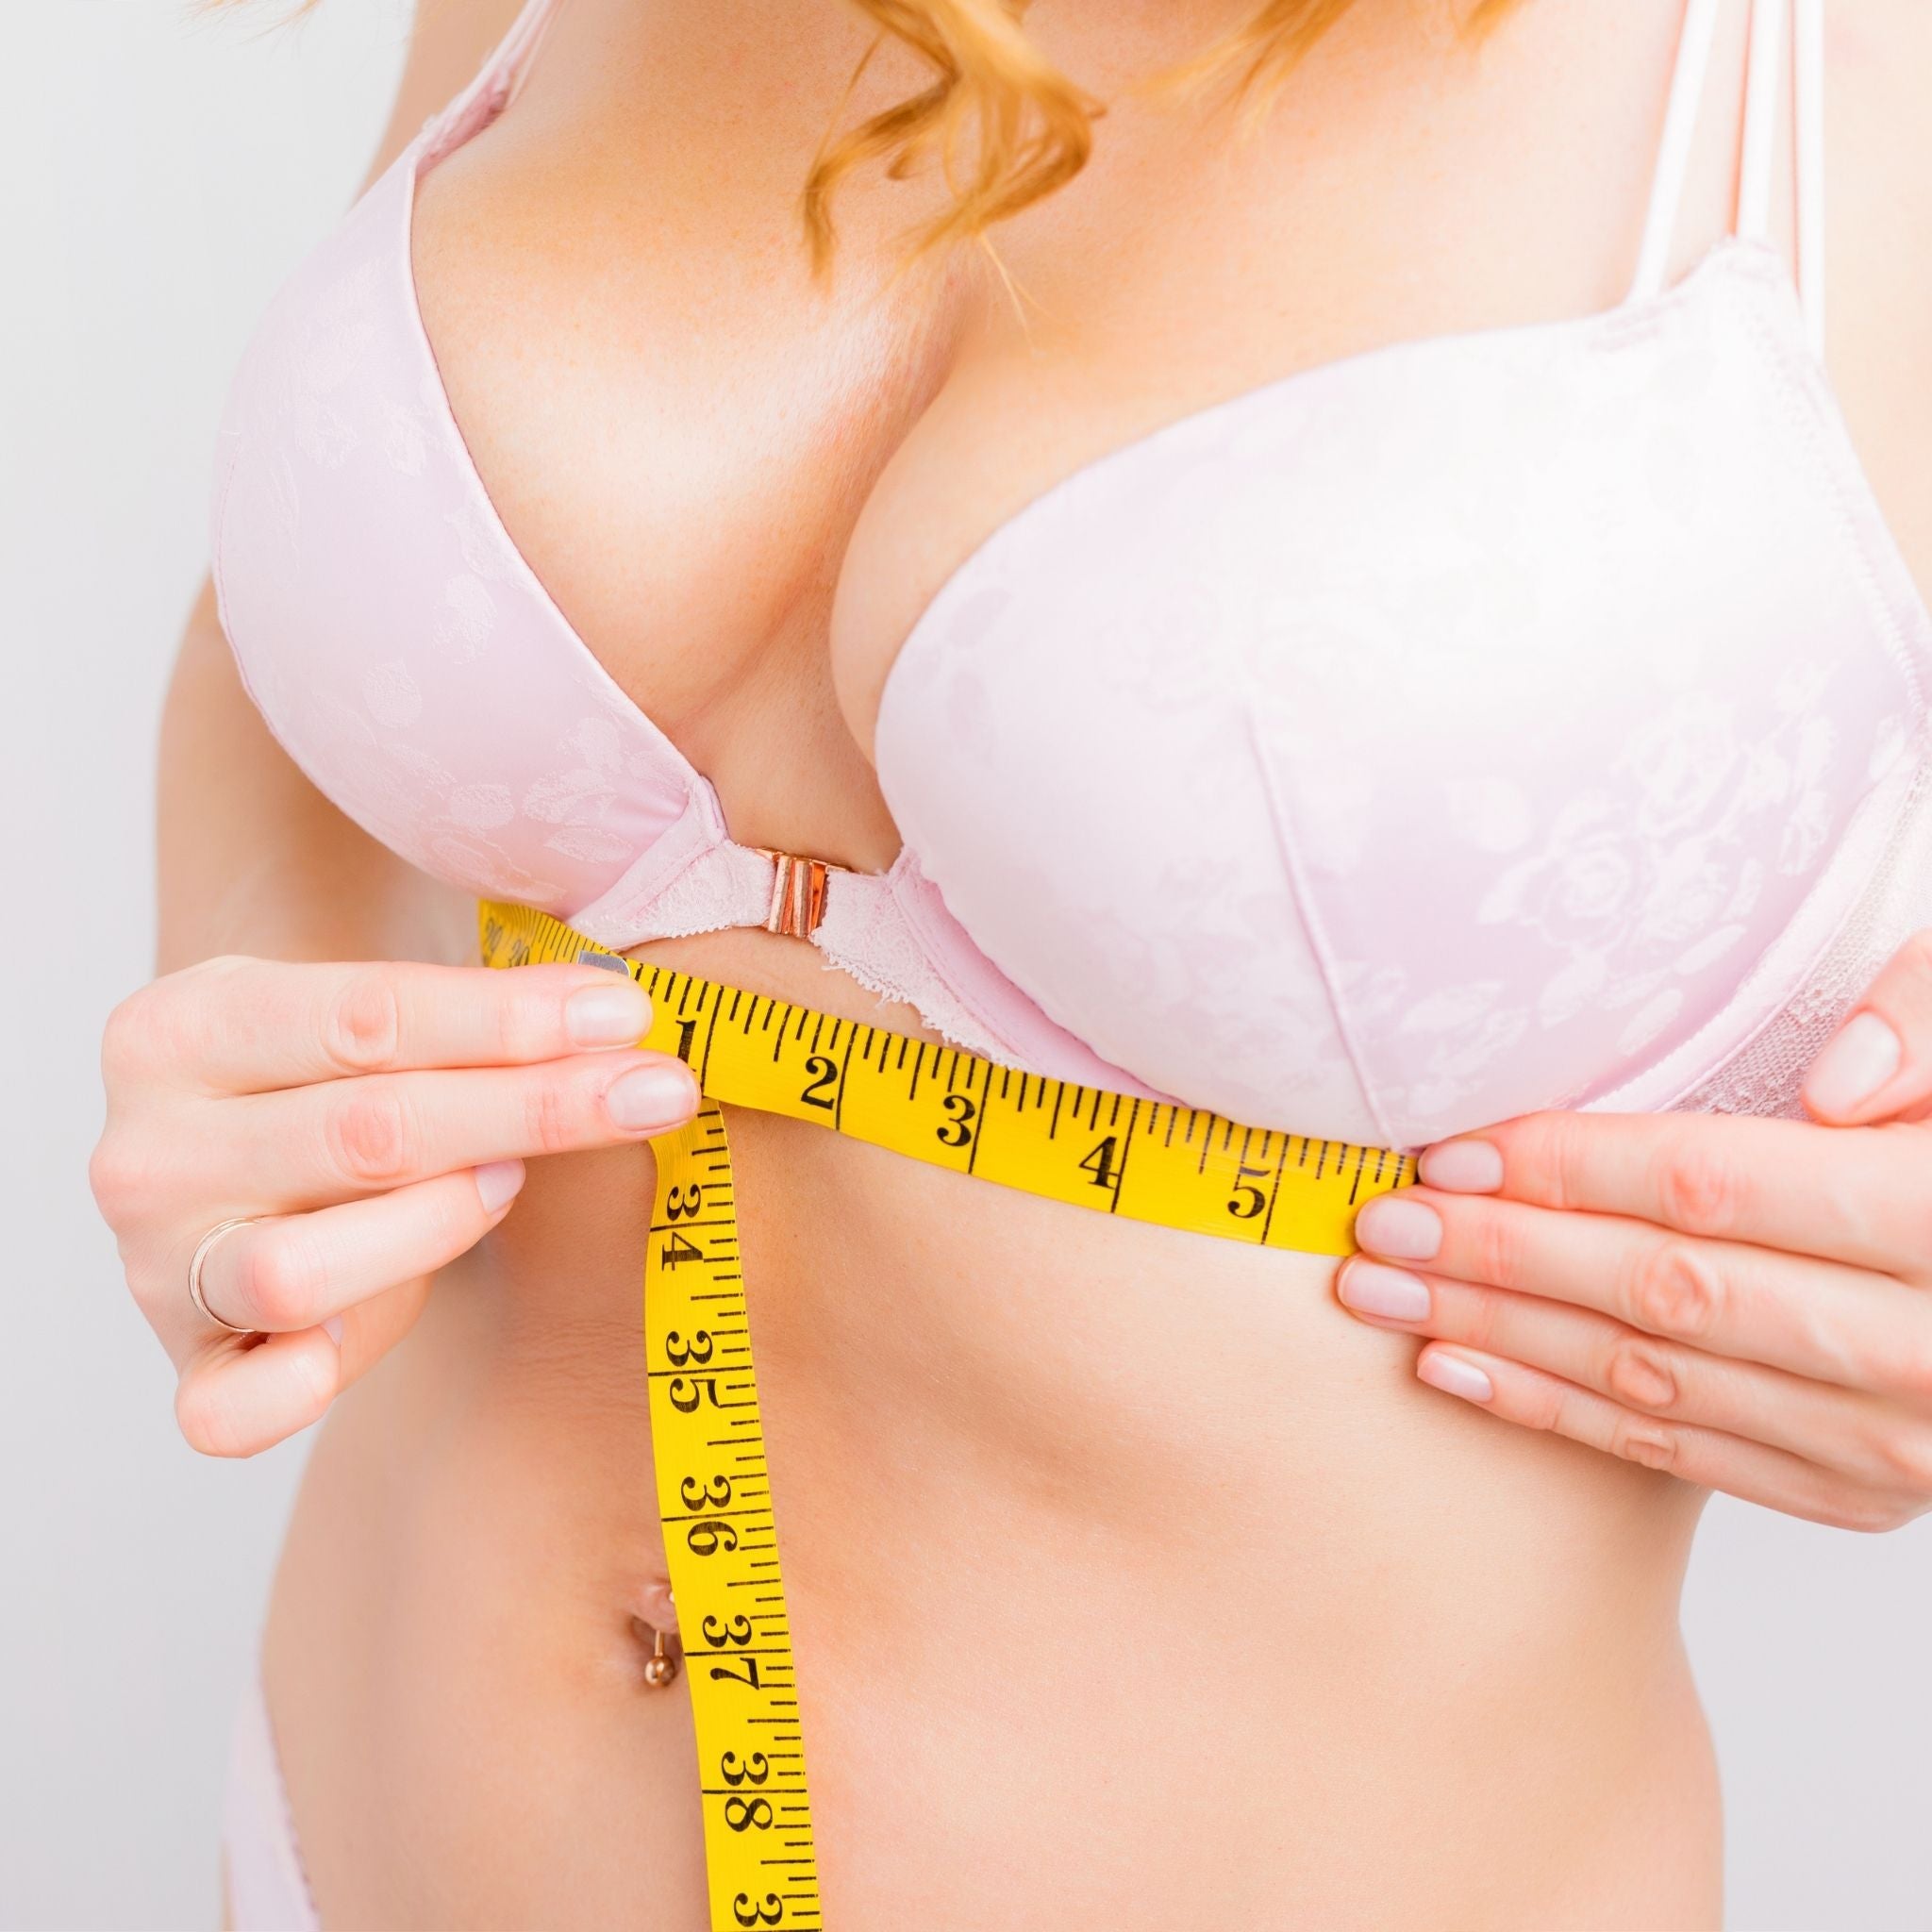 Can ANY shop measure your bra size without making a boob?